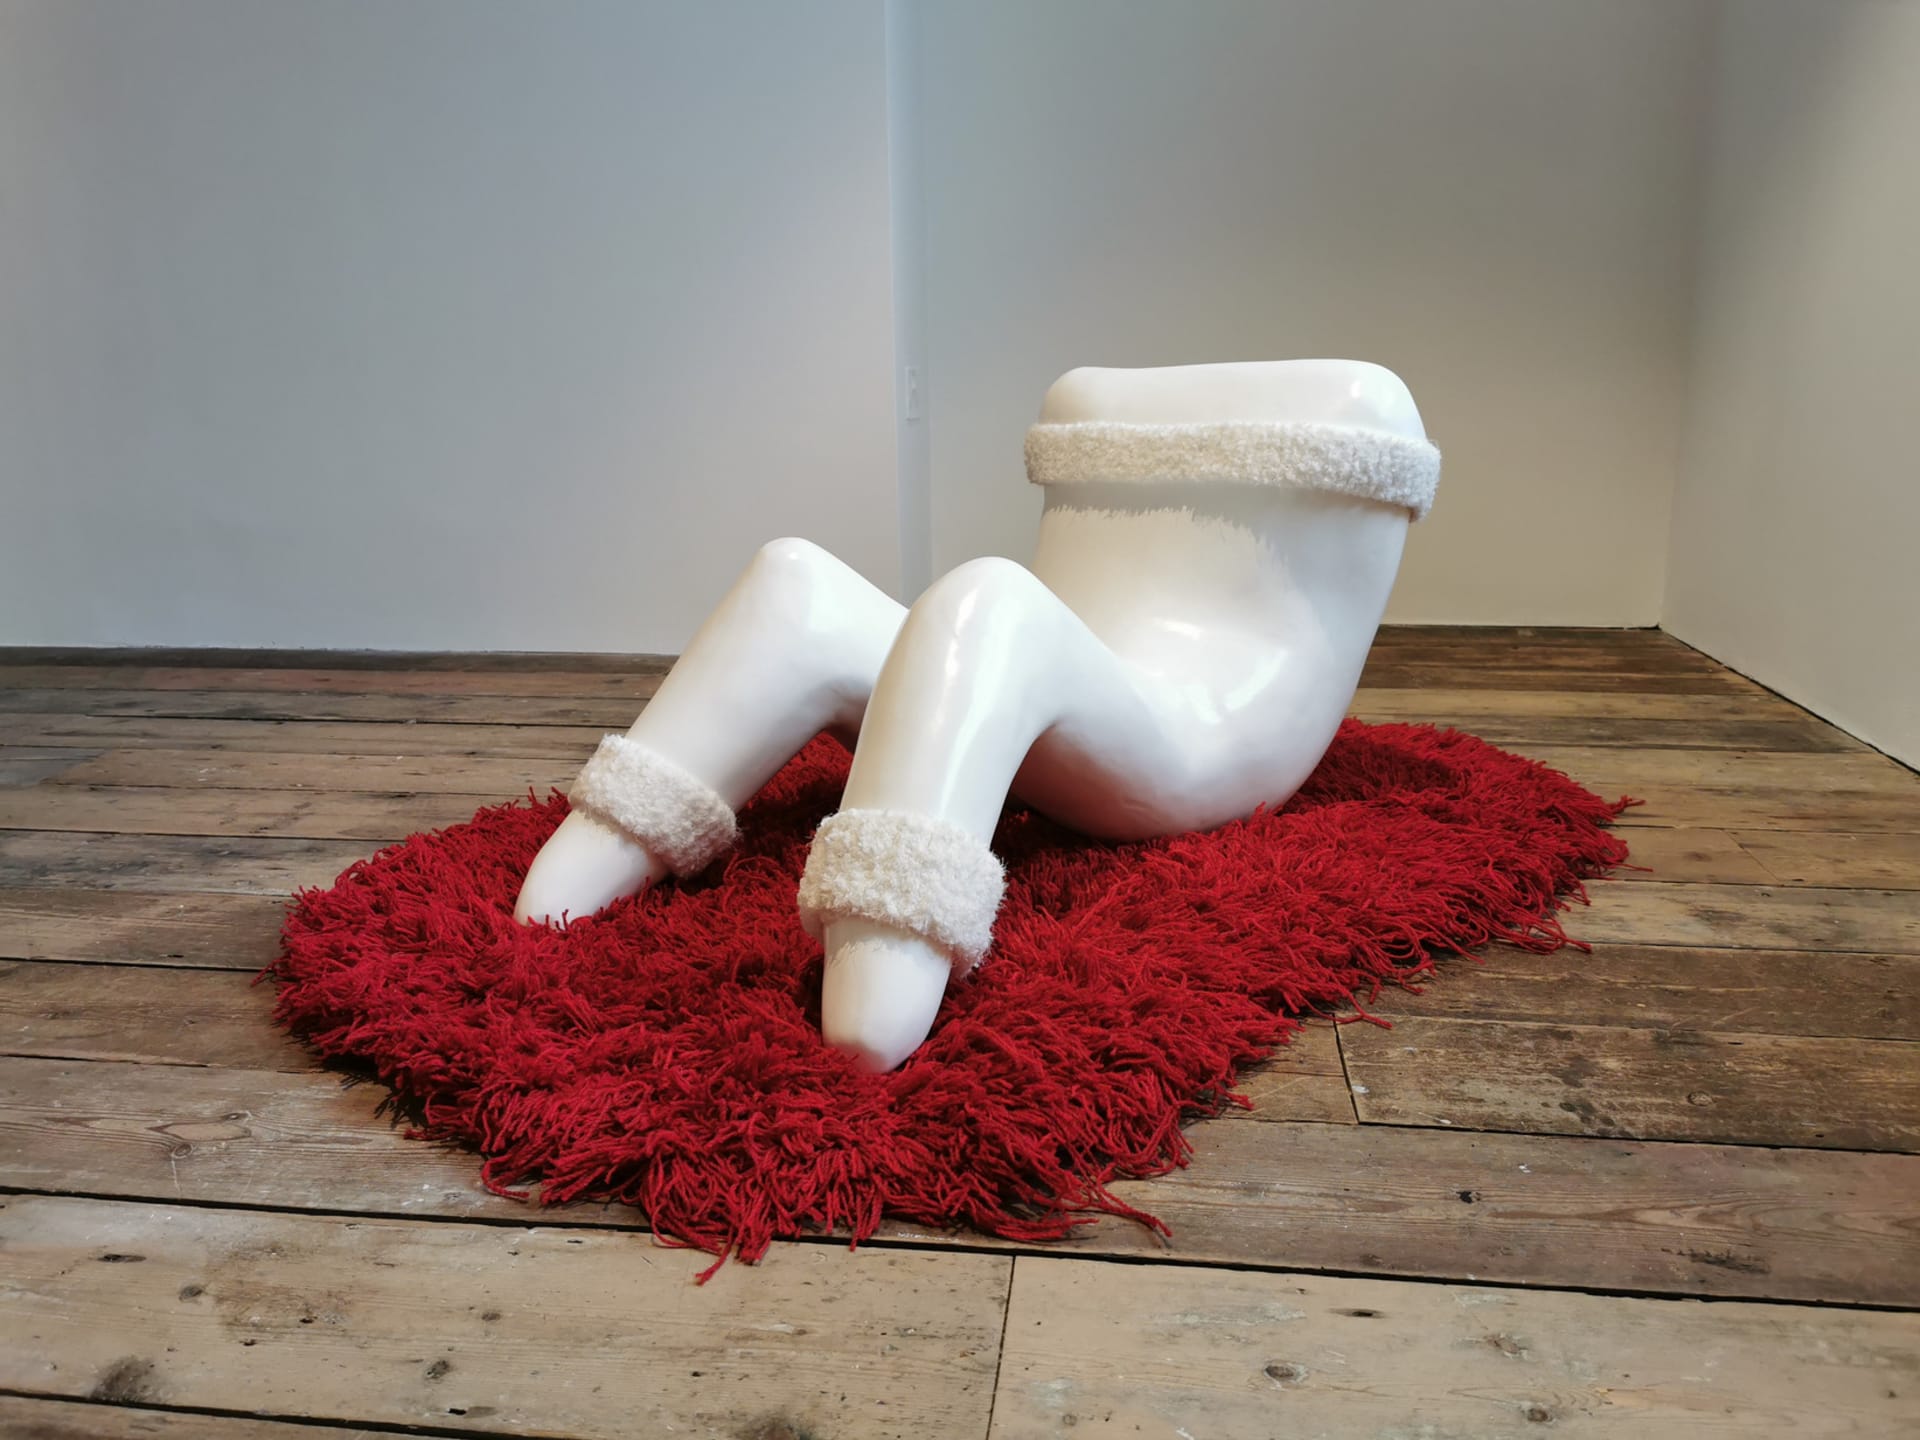 Materials: Jesmonite, Hand Tufted Carpet, Knitted headbands. 
An Anthropomorphic tooth performing sit-ups sits on a red red.